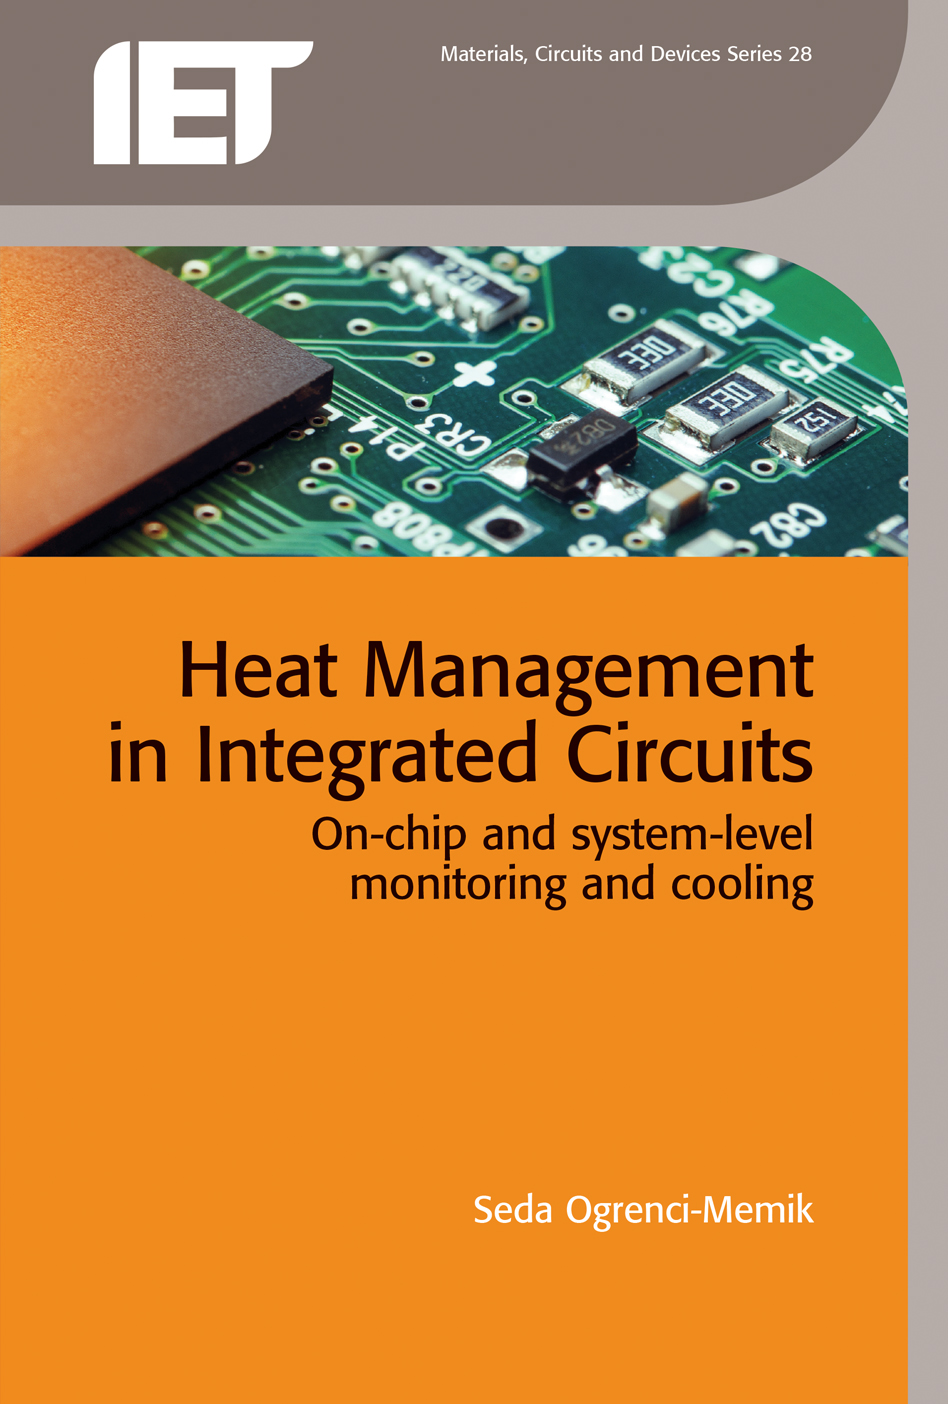 Heat Management in Integrated Circuits, On-chip and system-level monitoring and cooling